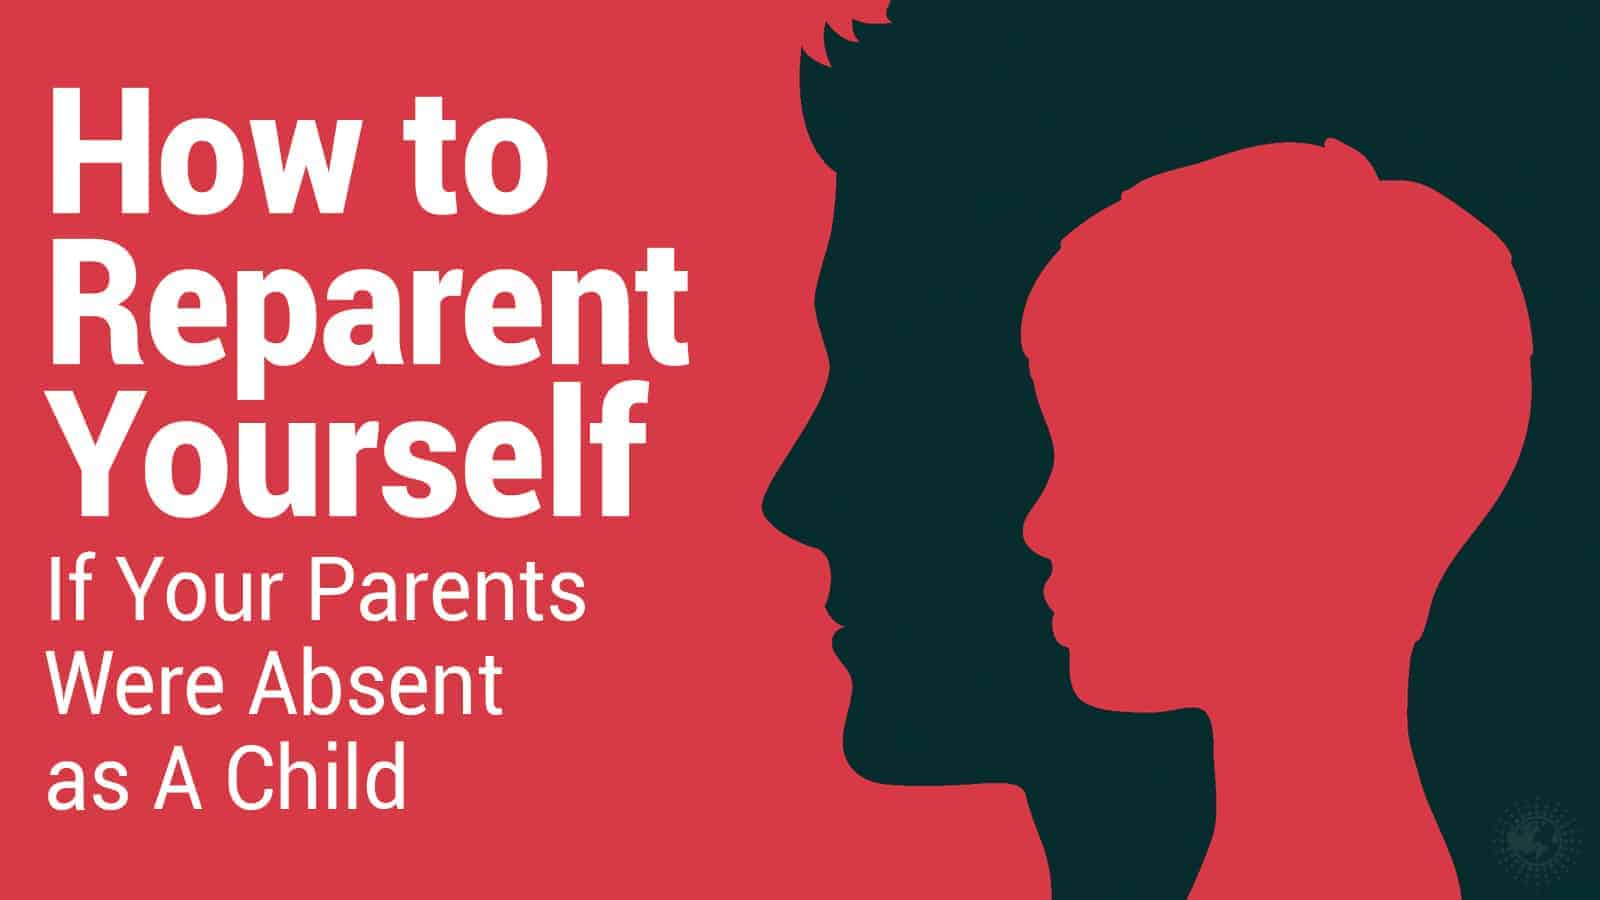 How to Reparent Yourself If Your Parents Were Absent as A Child